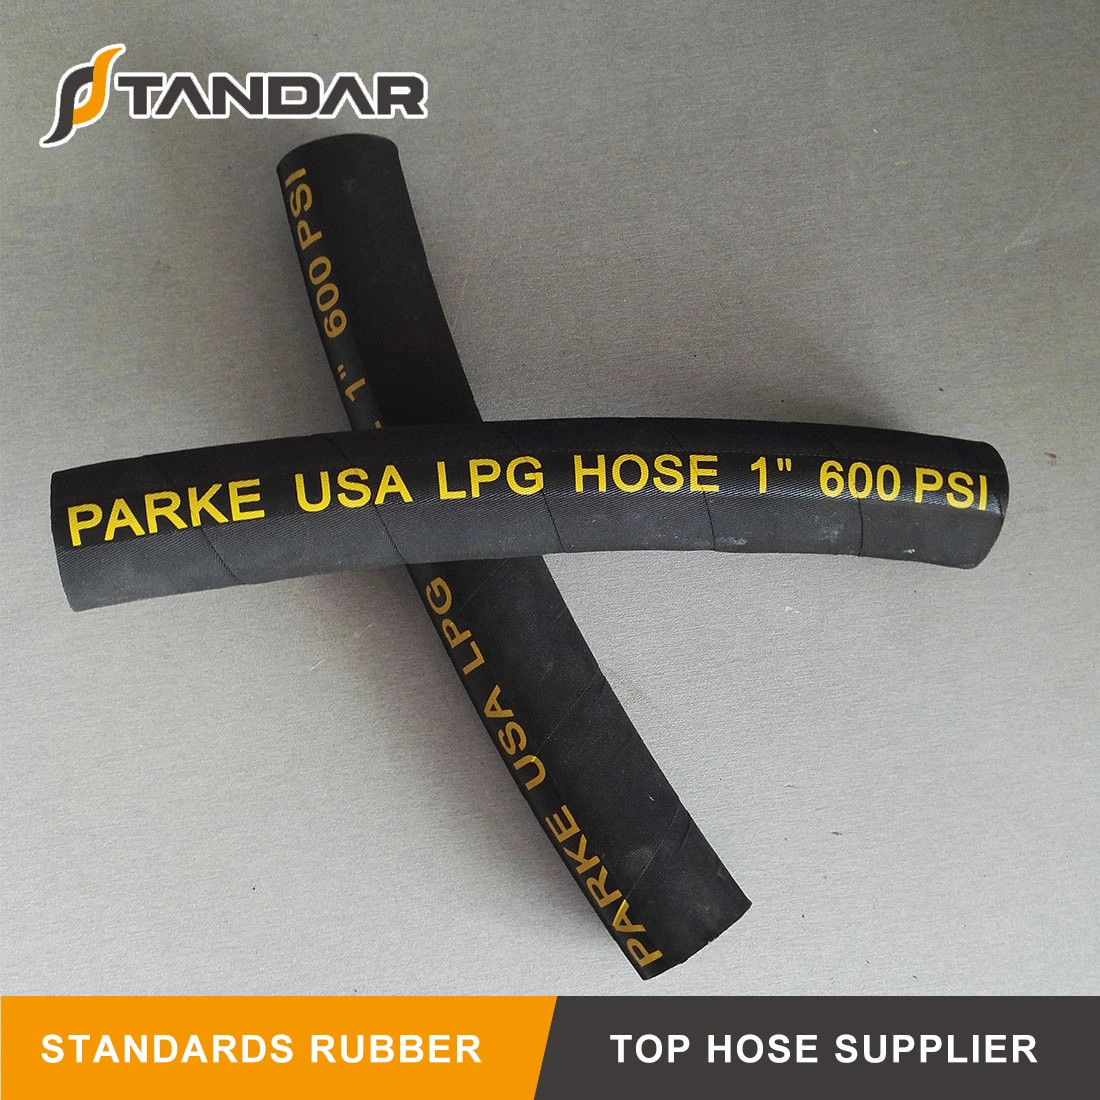 Low Temperature Flexible Rubber Coleman Propane Tank Adapter LPG Gas Flex Hoses and Fittings